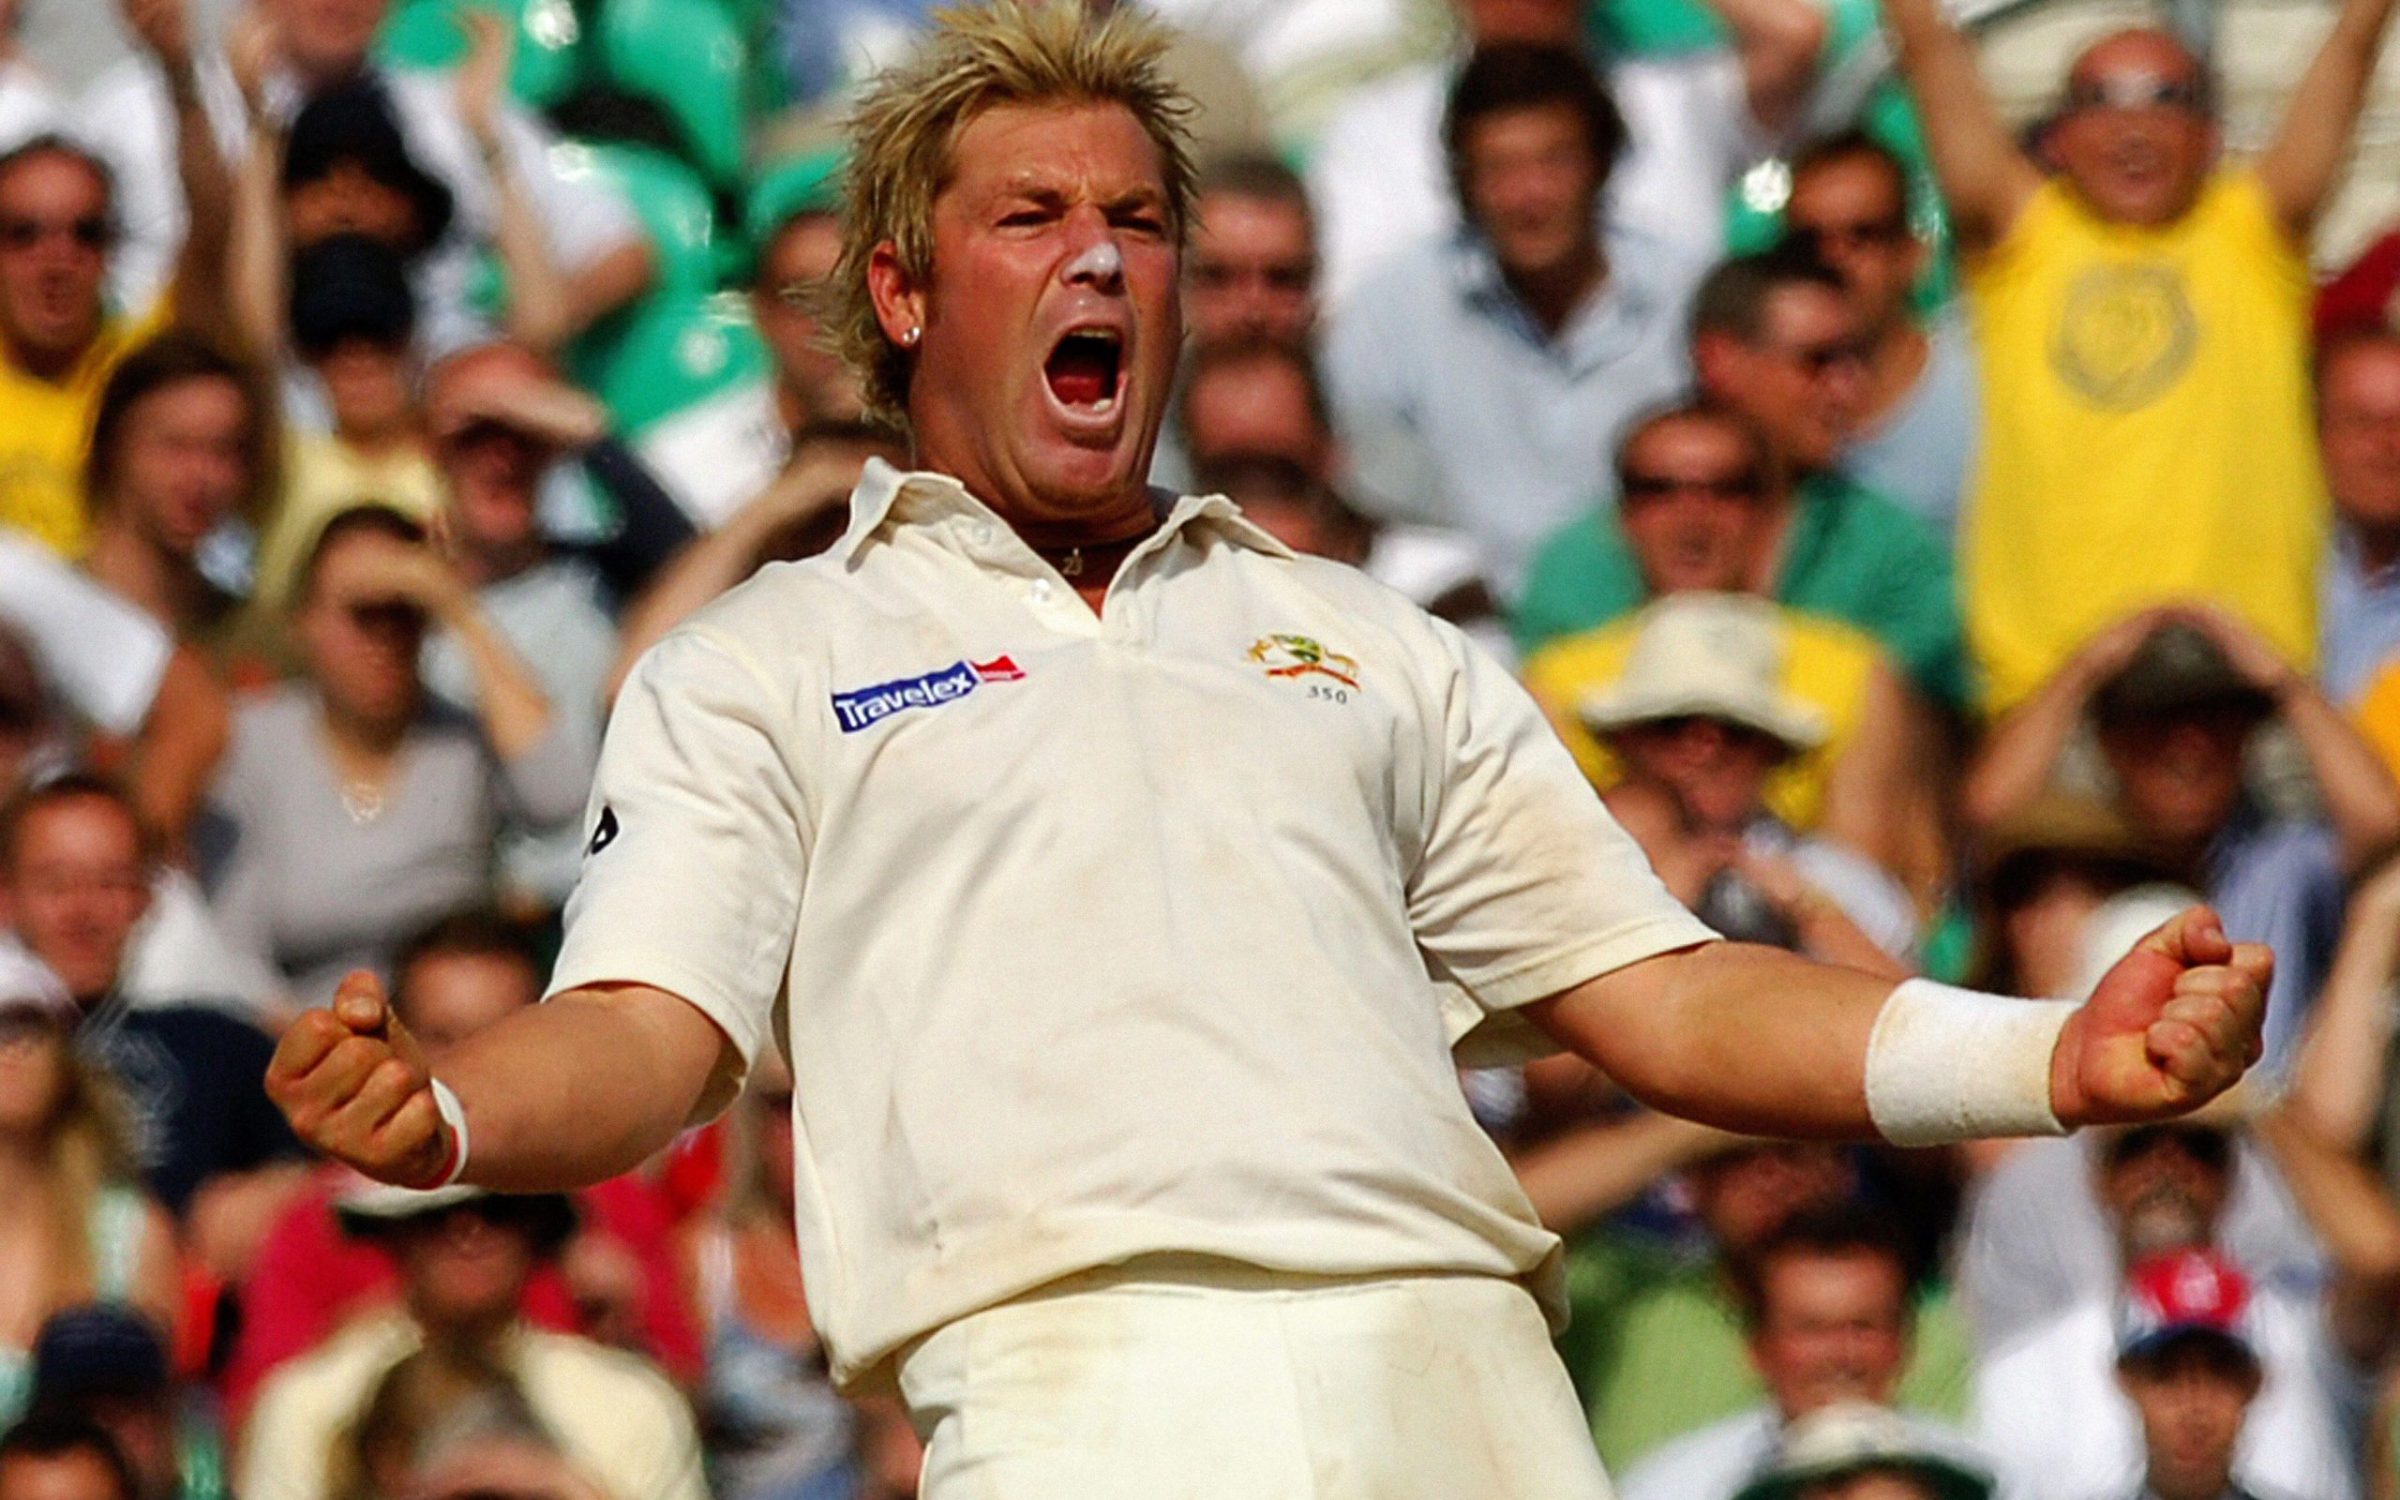 Australia's Shane Warne celebrates after he caught and bowled England's Andrew Flintoff for 8 runs during the final day of the fifth npower Test match at the Brit Oval, London.